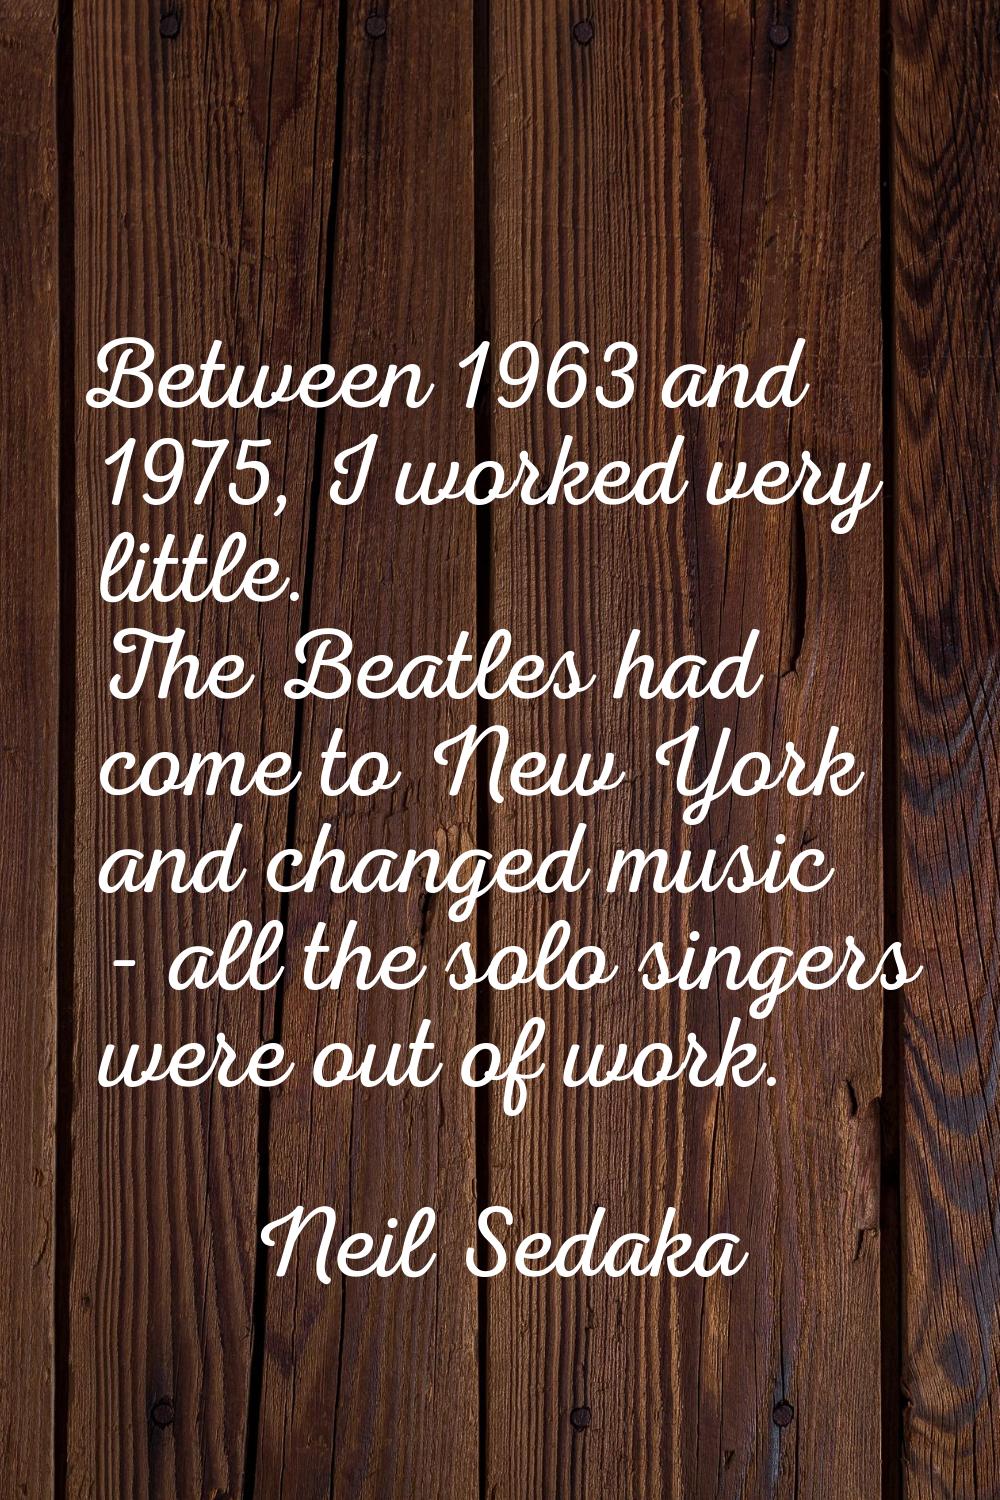 Between 1963 and 1975, I worked very little. The Beatles had come to New York and changed music - a